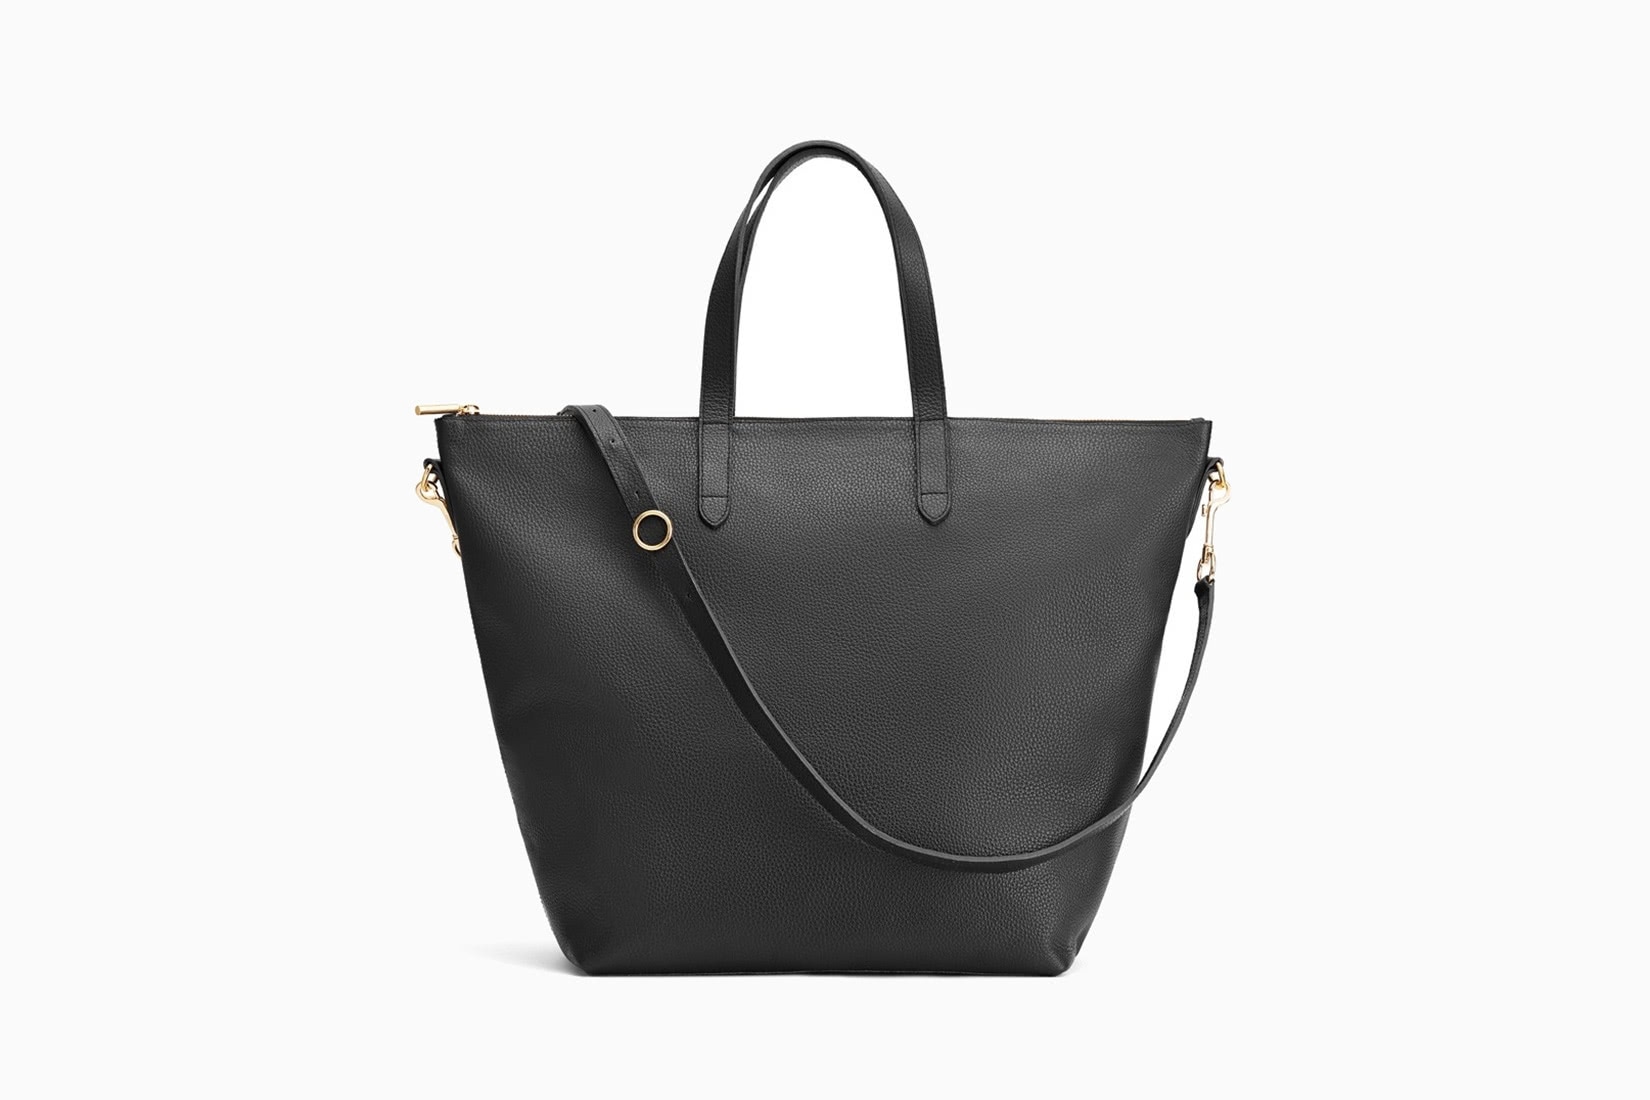 11 Best Travel Tote Bags: Smart & Stylish Carry-On Bags (2021)